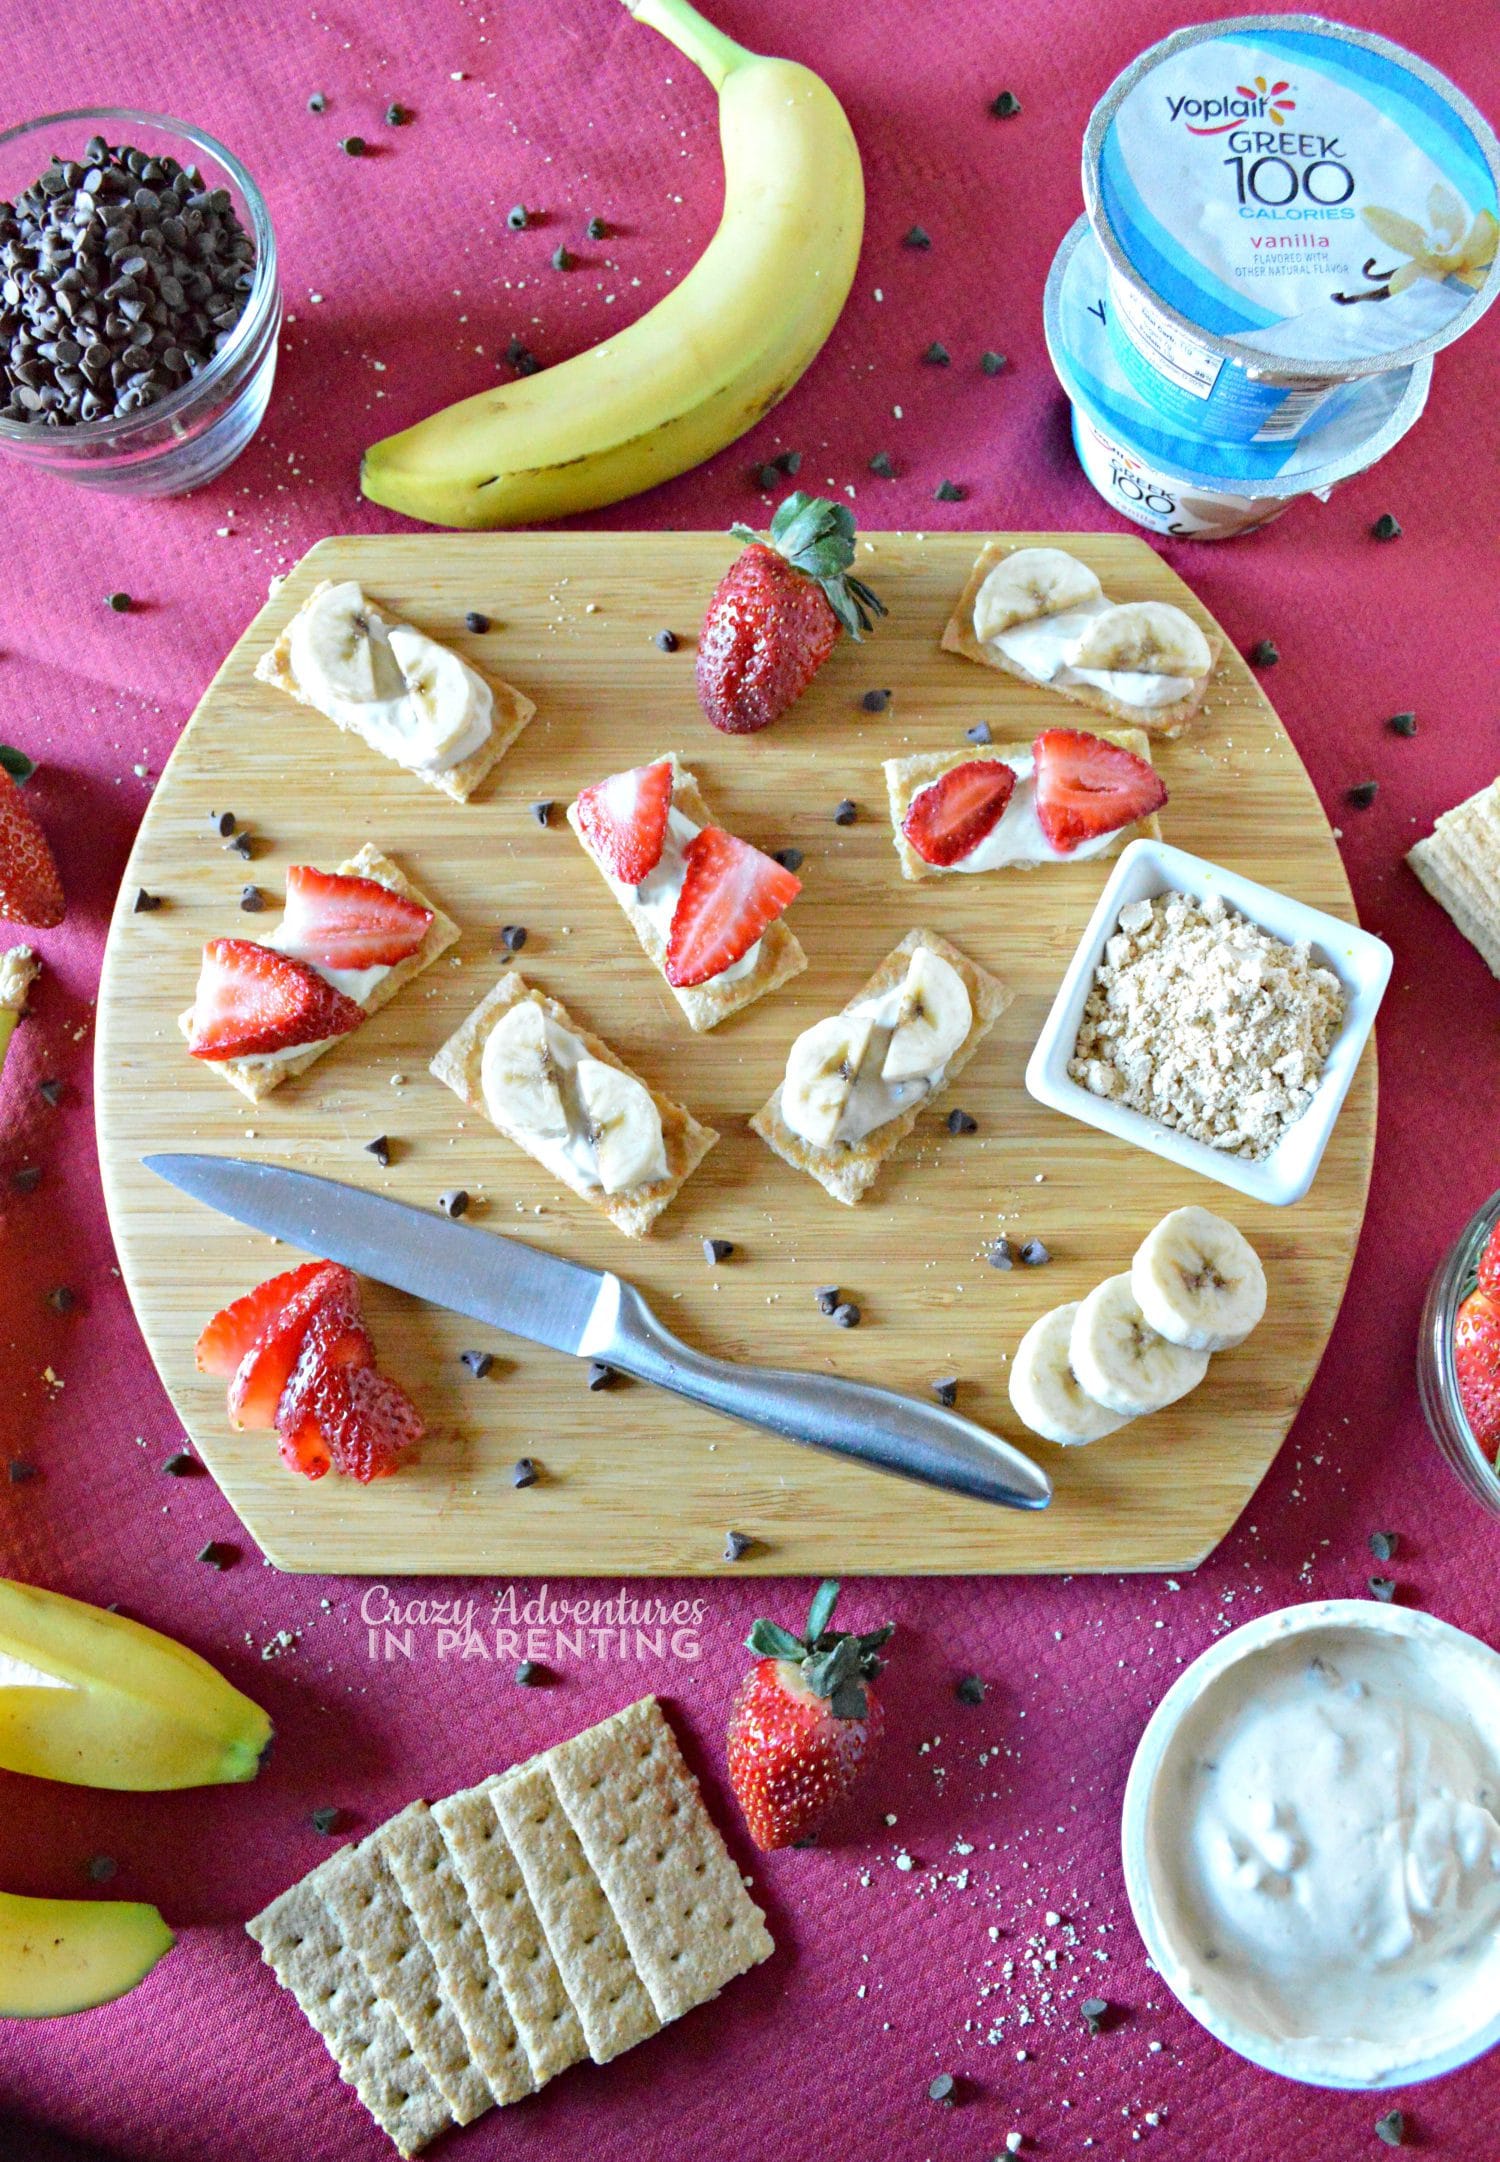 Protein-Packed Peanut Butter Chocolate Chip Yogurt Spread on Graham Crackers with Fruit Slices